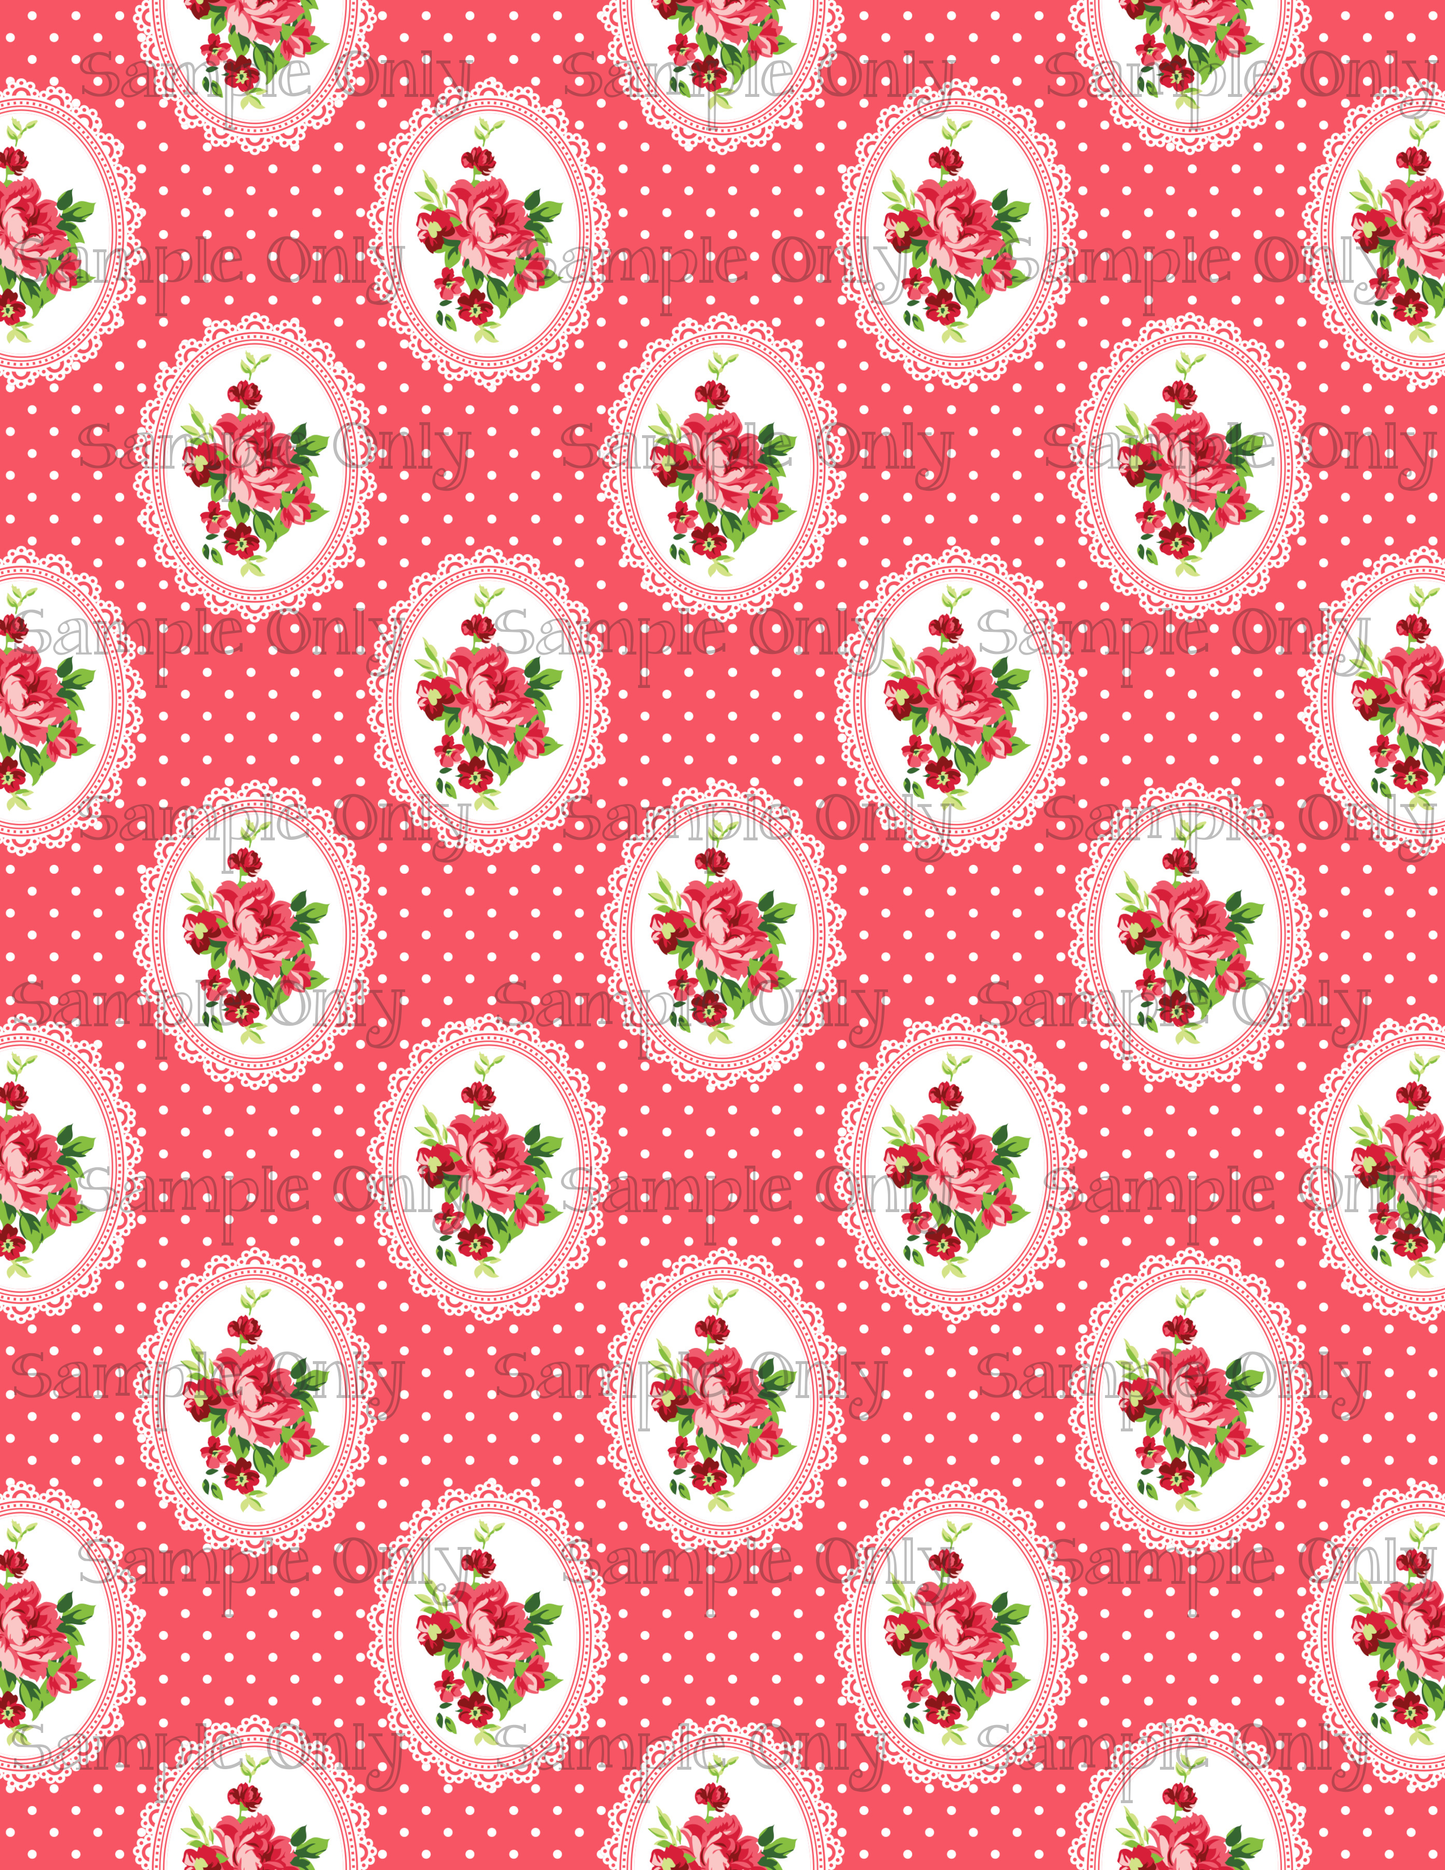 Shabby Valentine Oval Floral Cameo Pattern Image Sheet For Polymer Clay Transfer Decal DIGITAL FILE OR PRINTED